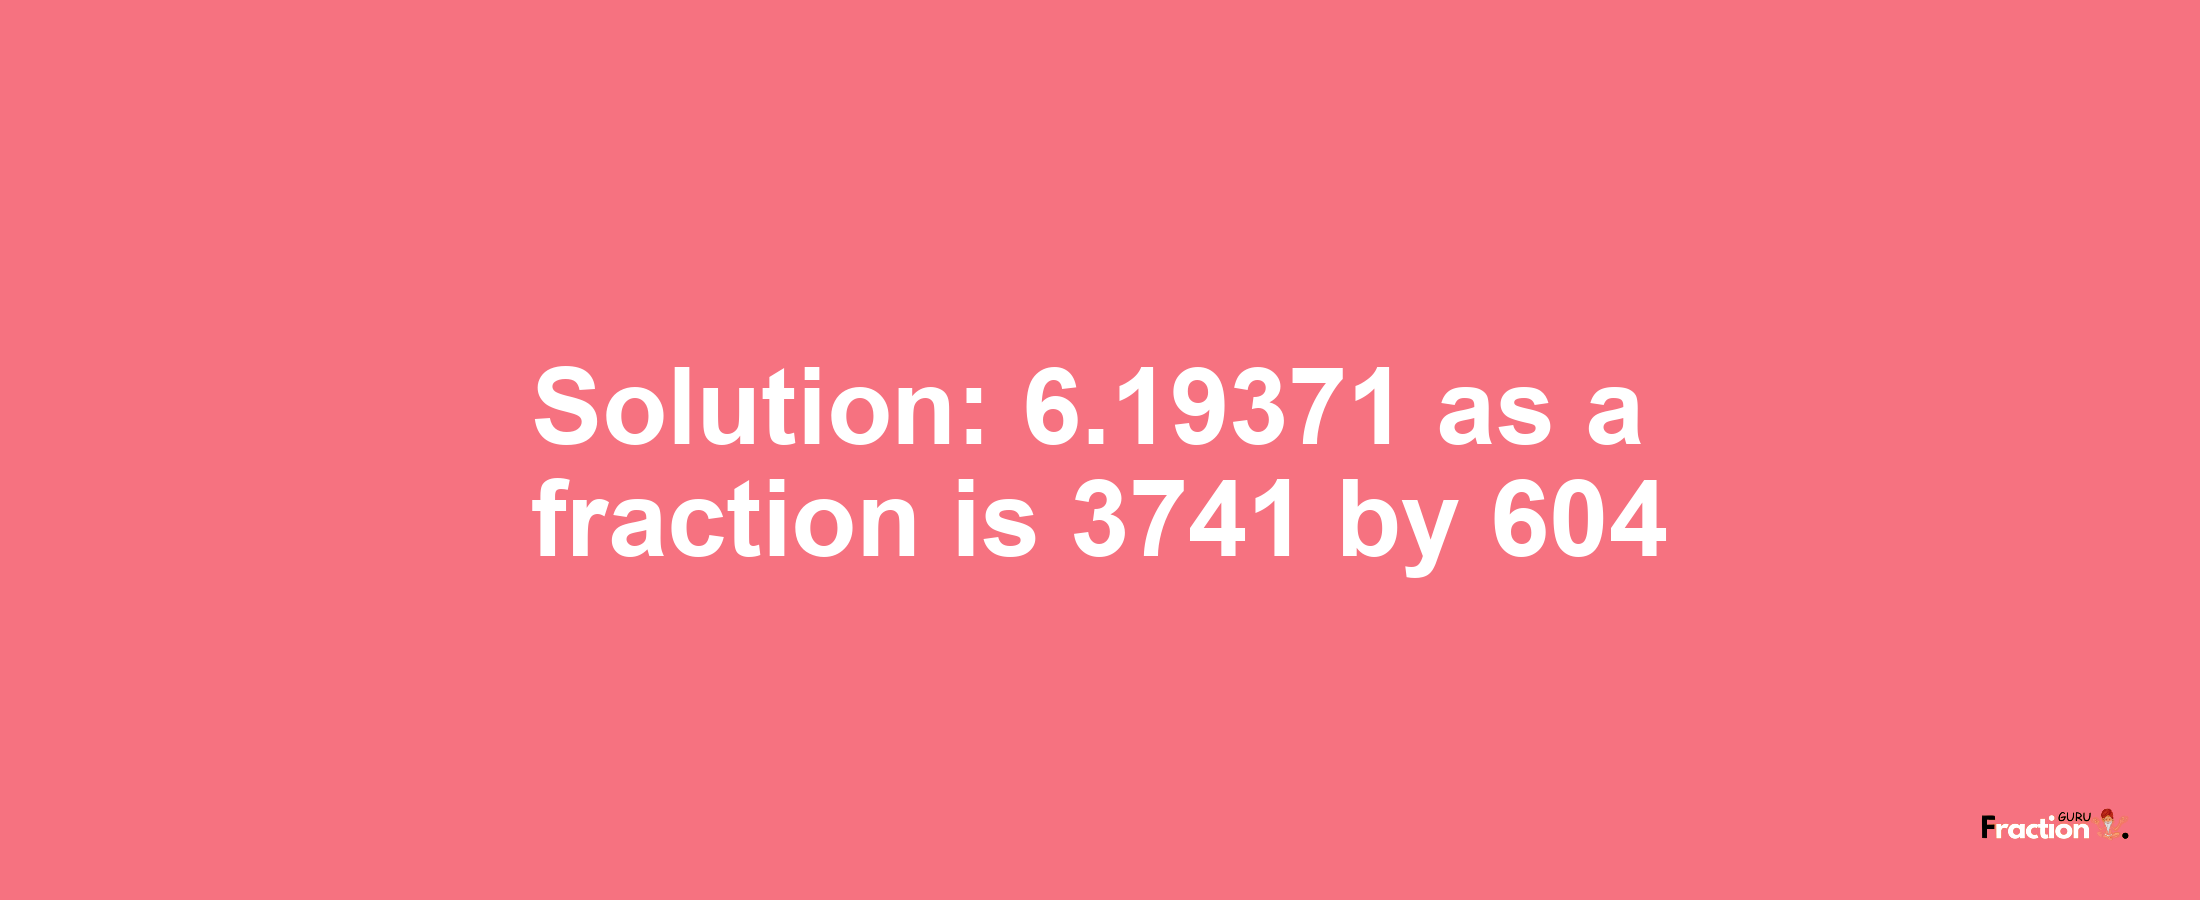 Solution:6.19371 as a fraction is 3741/604